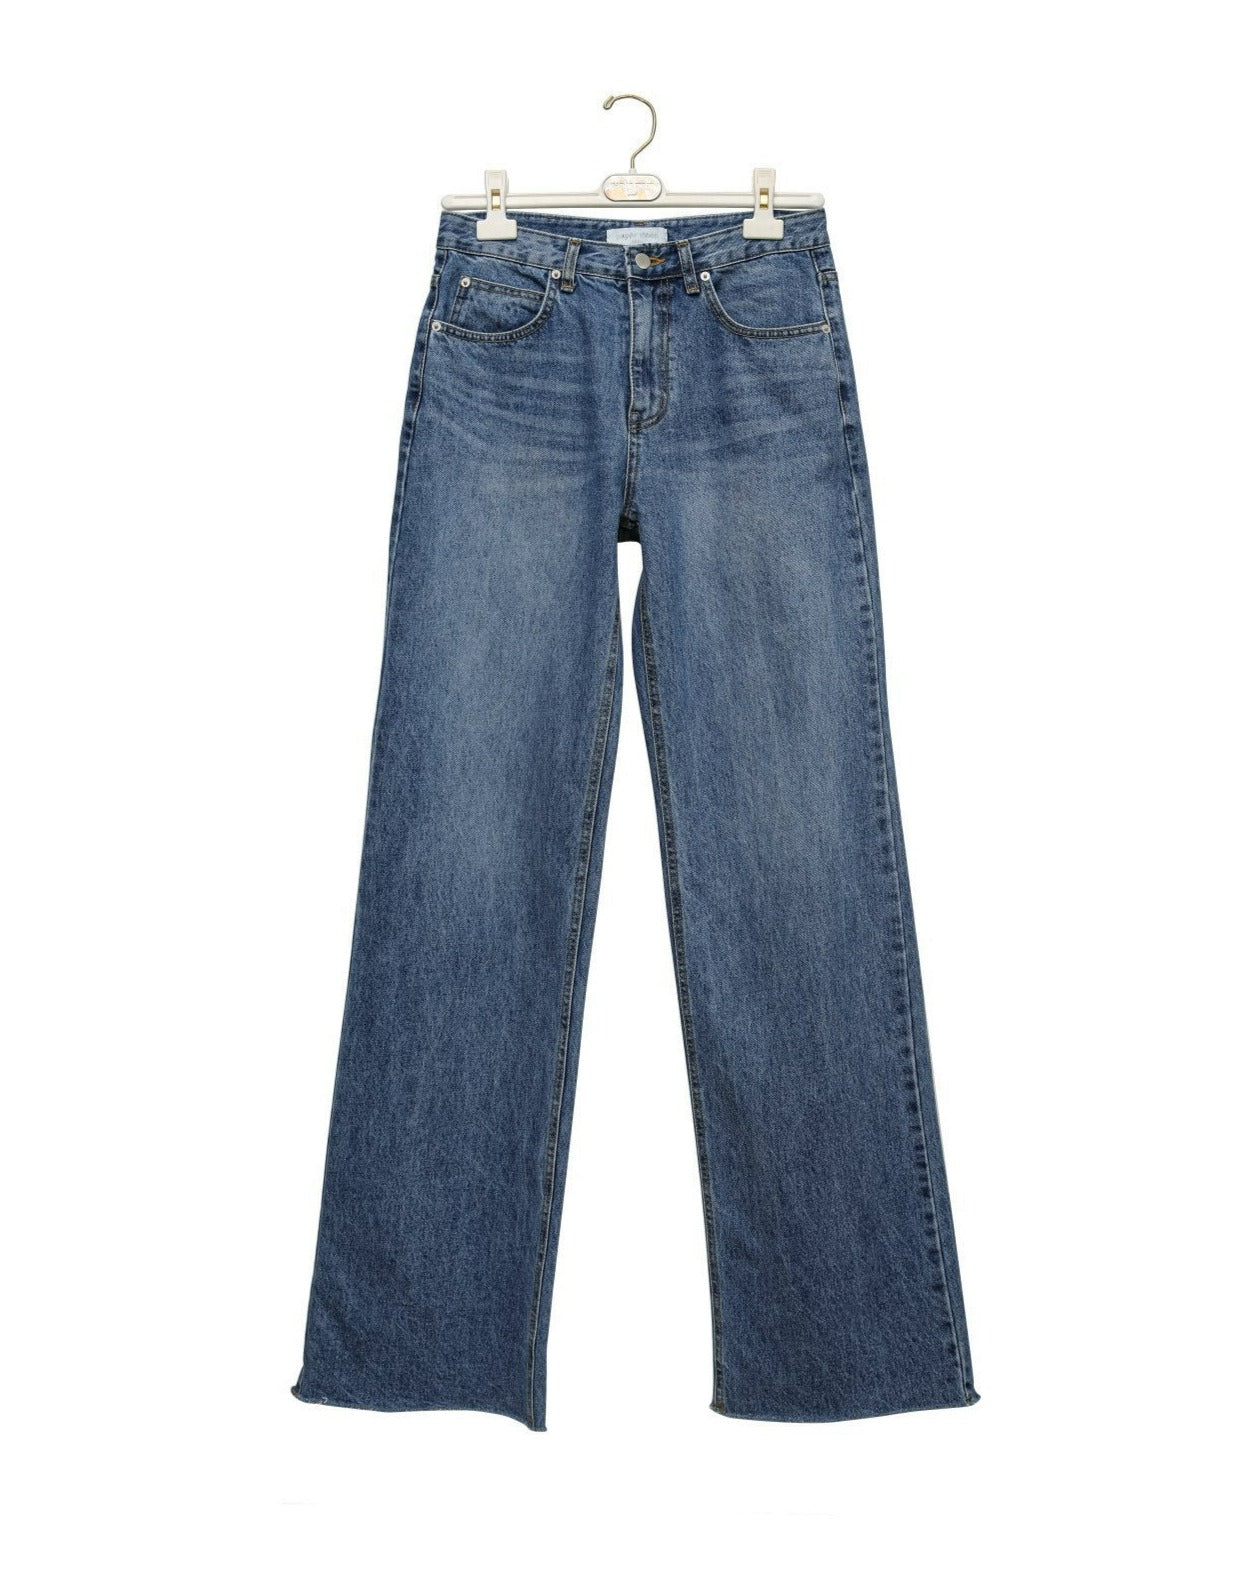 【PAPERMOON ペーパームーン】SS / Classic Raw - Cut Wide Fit Mid Blue Jeans